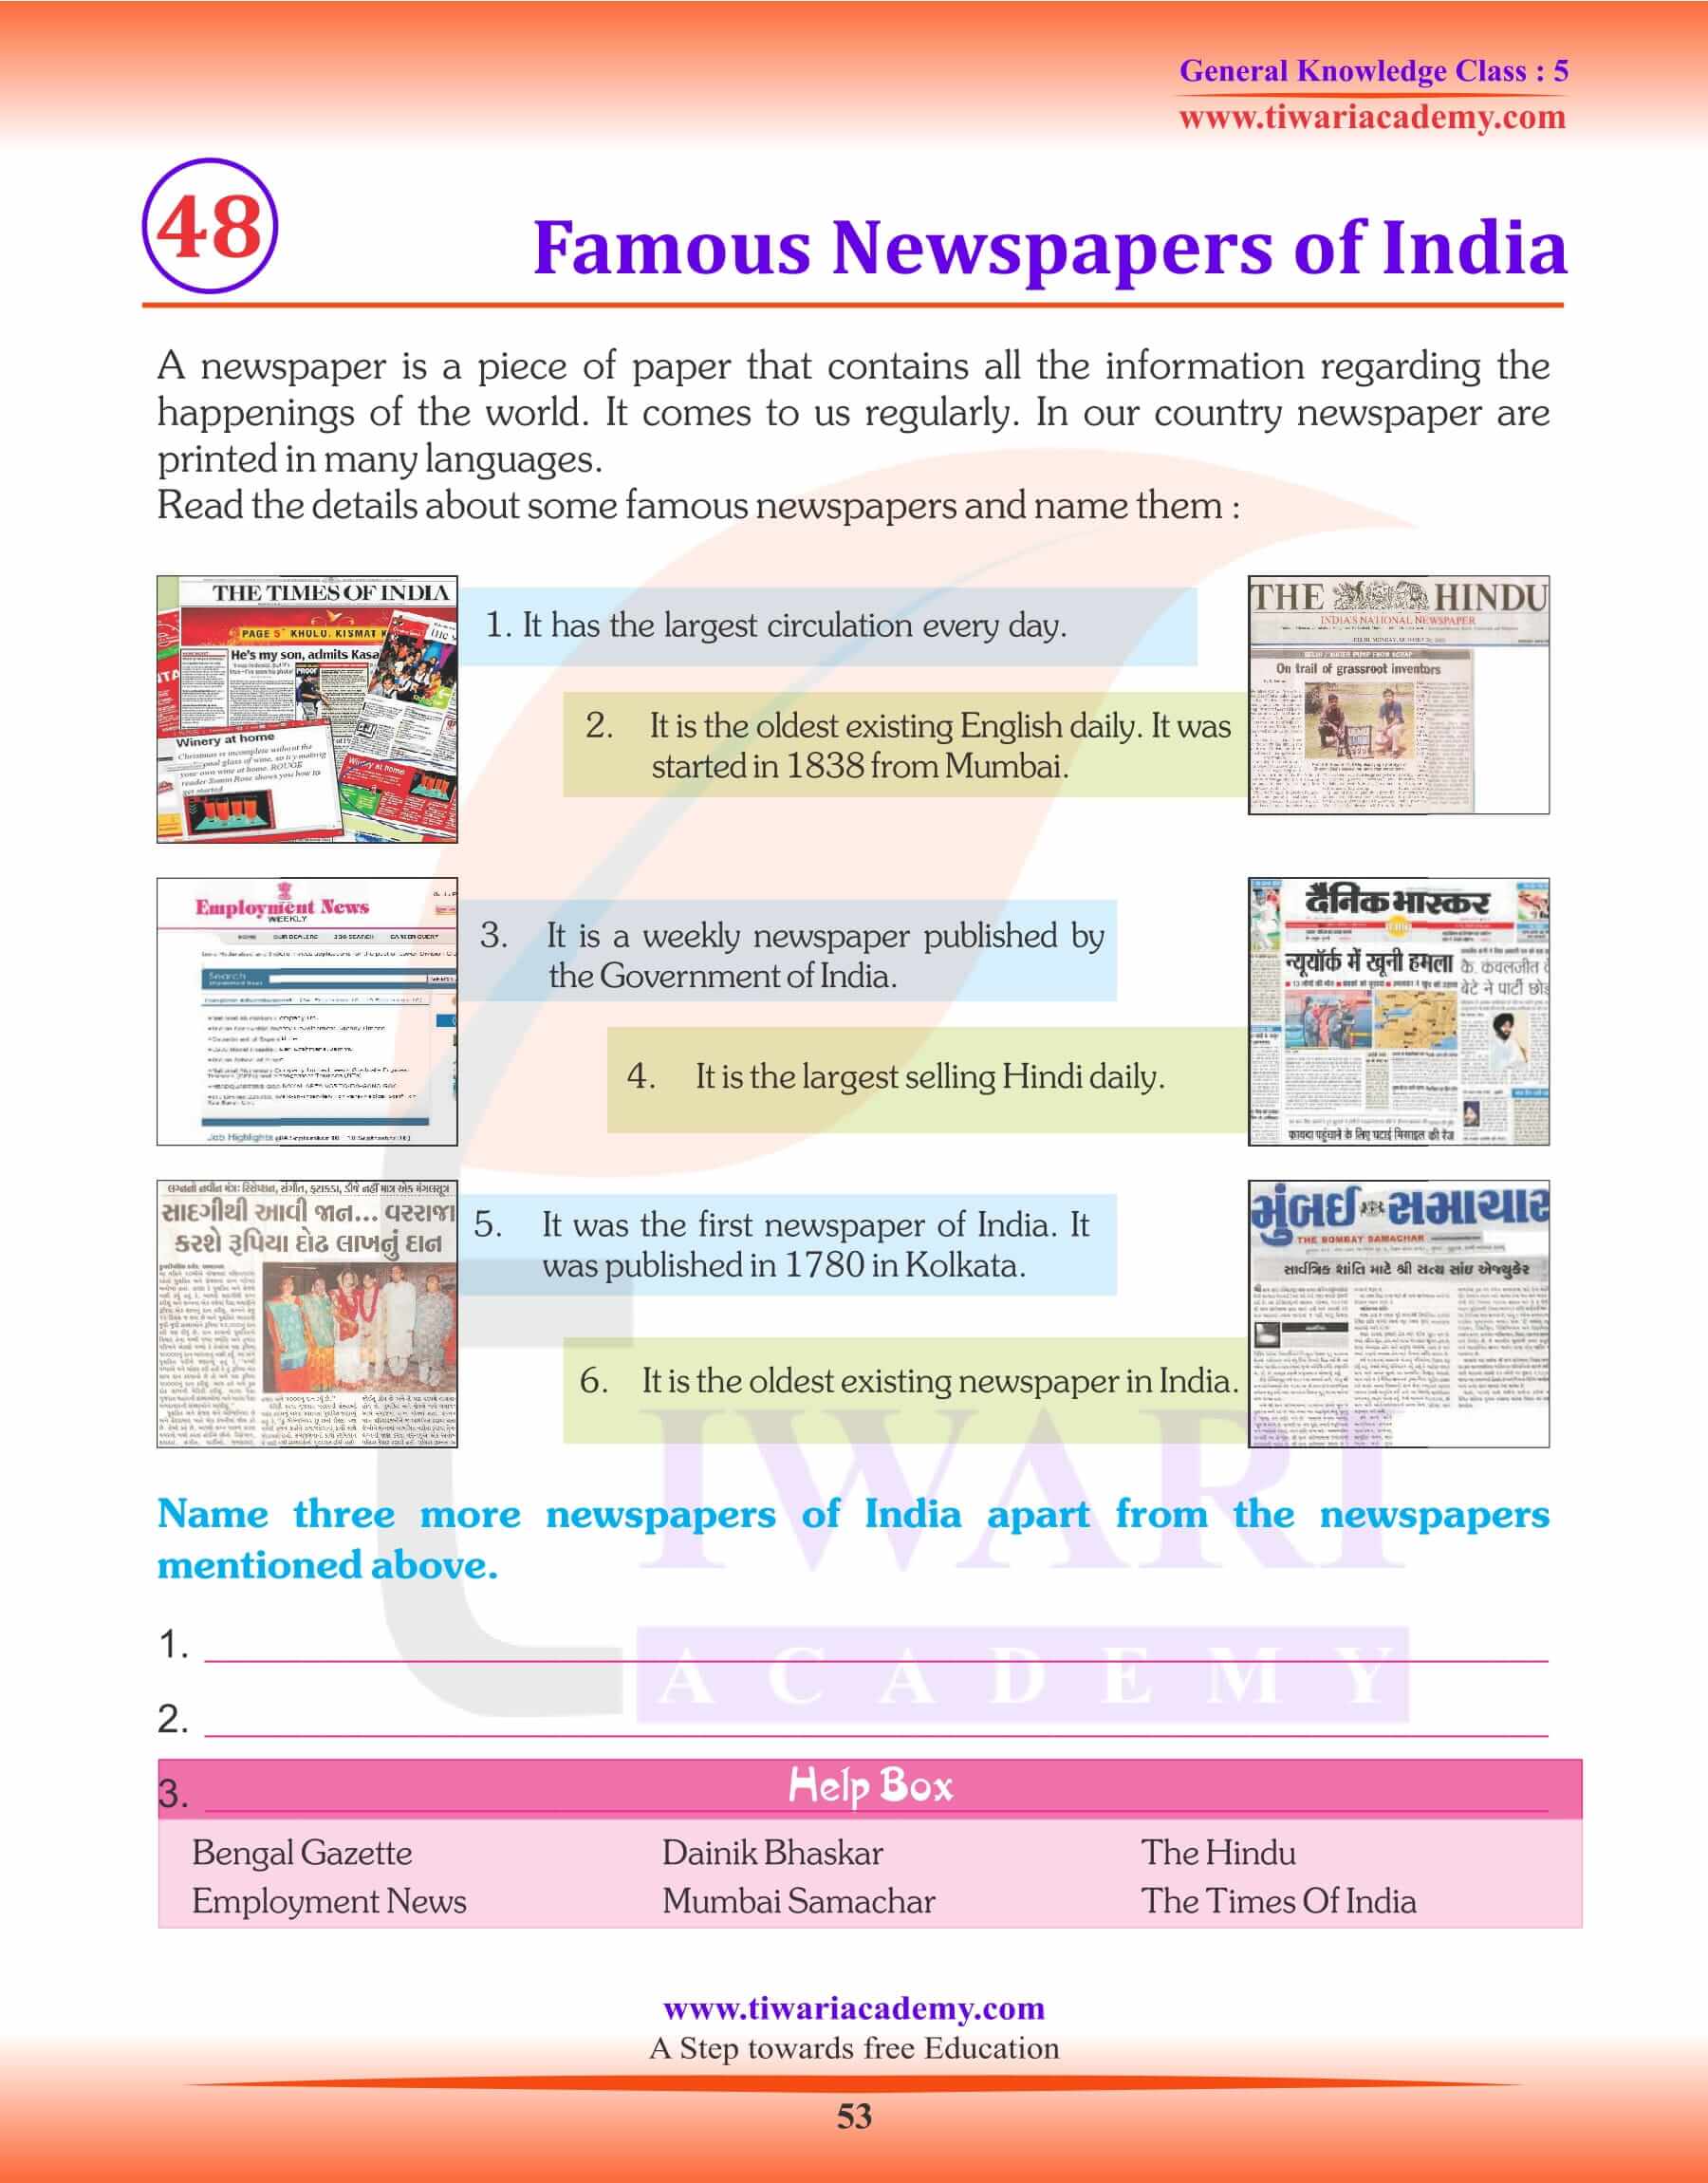 Famous Newspapers of India